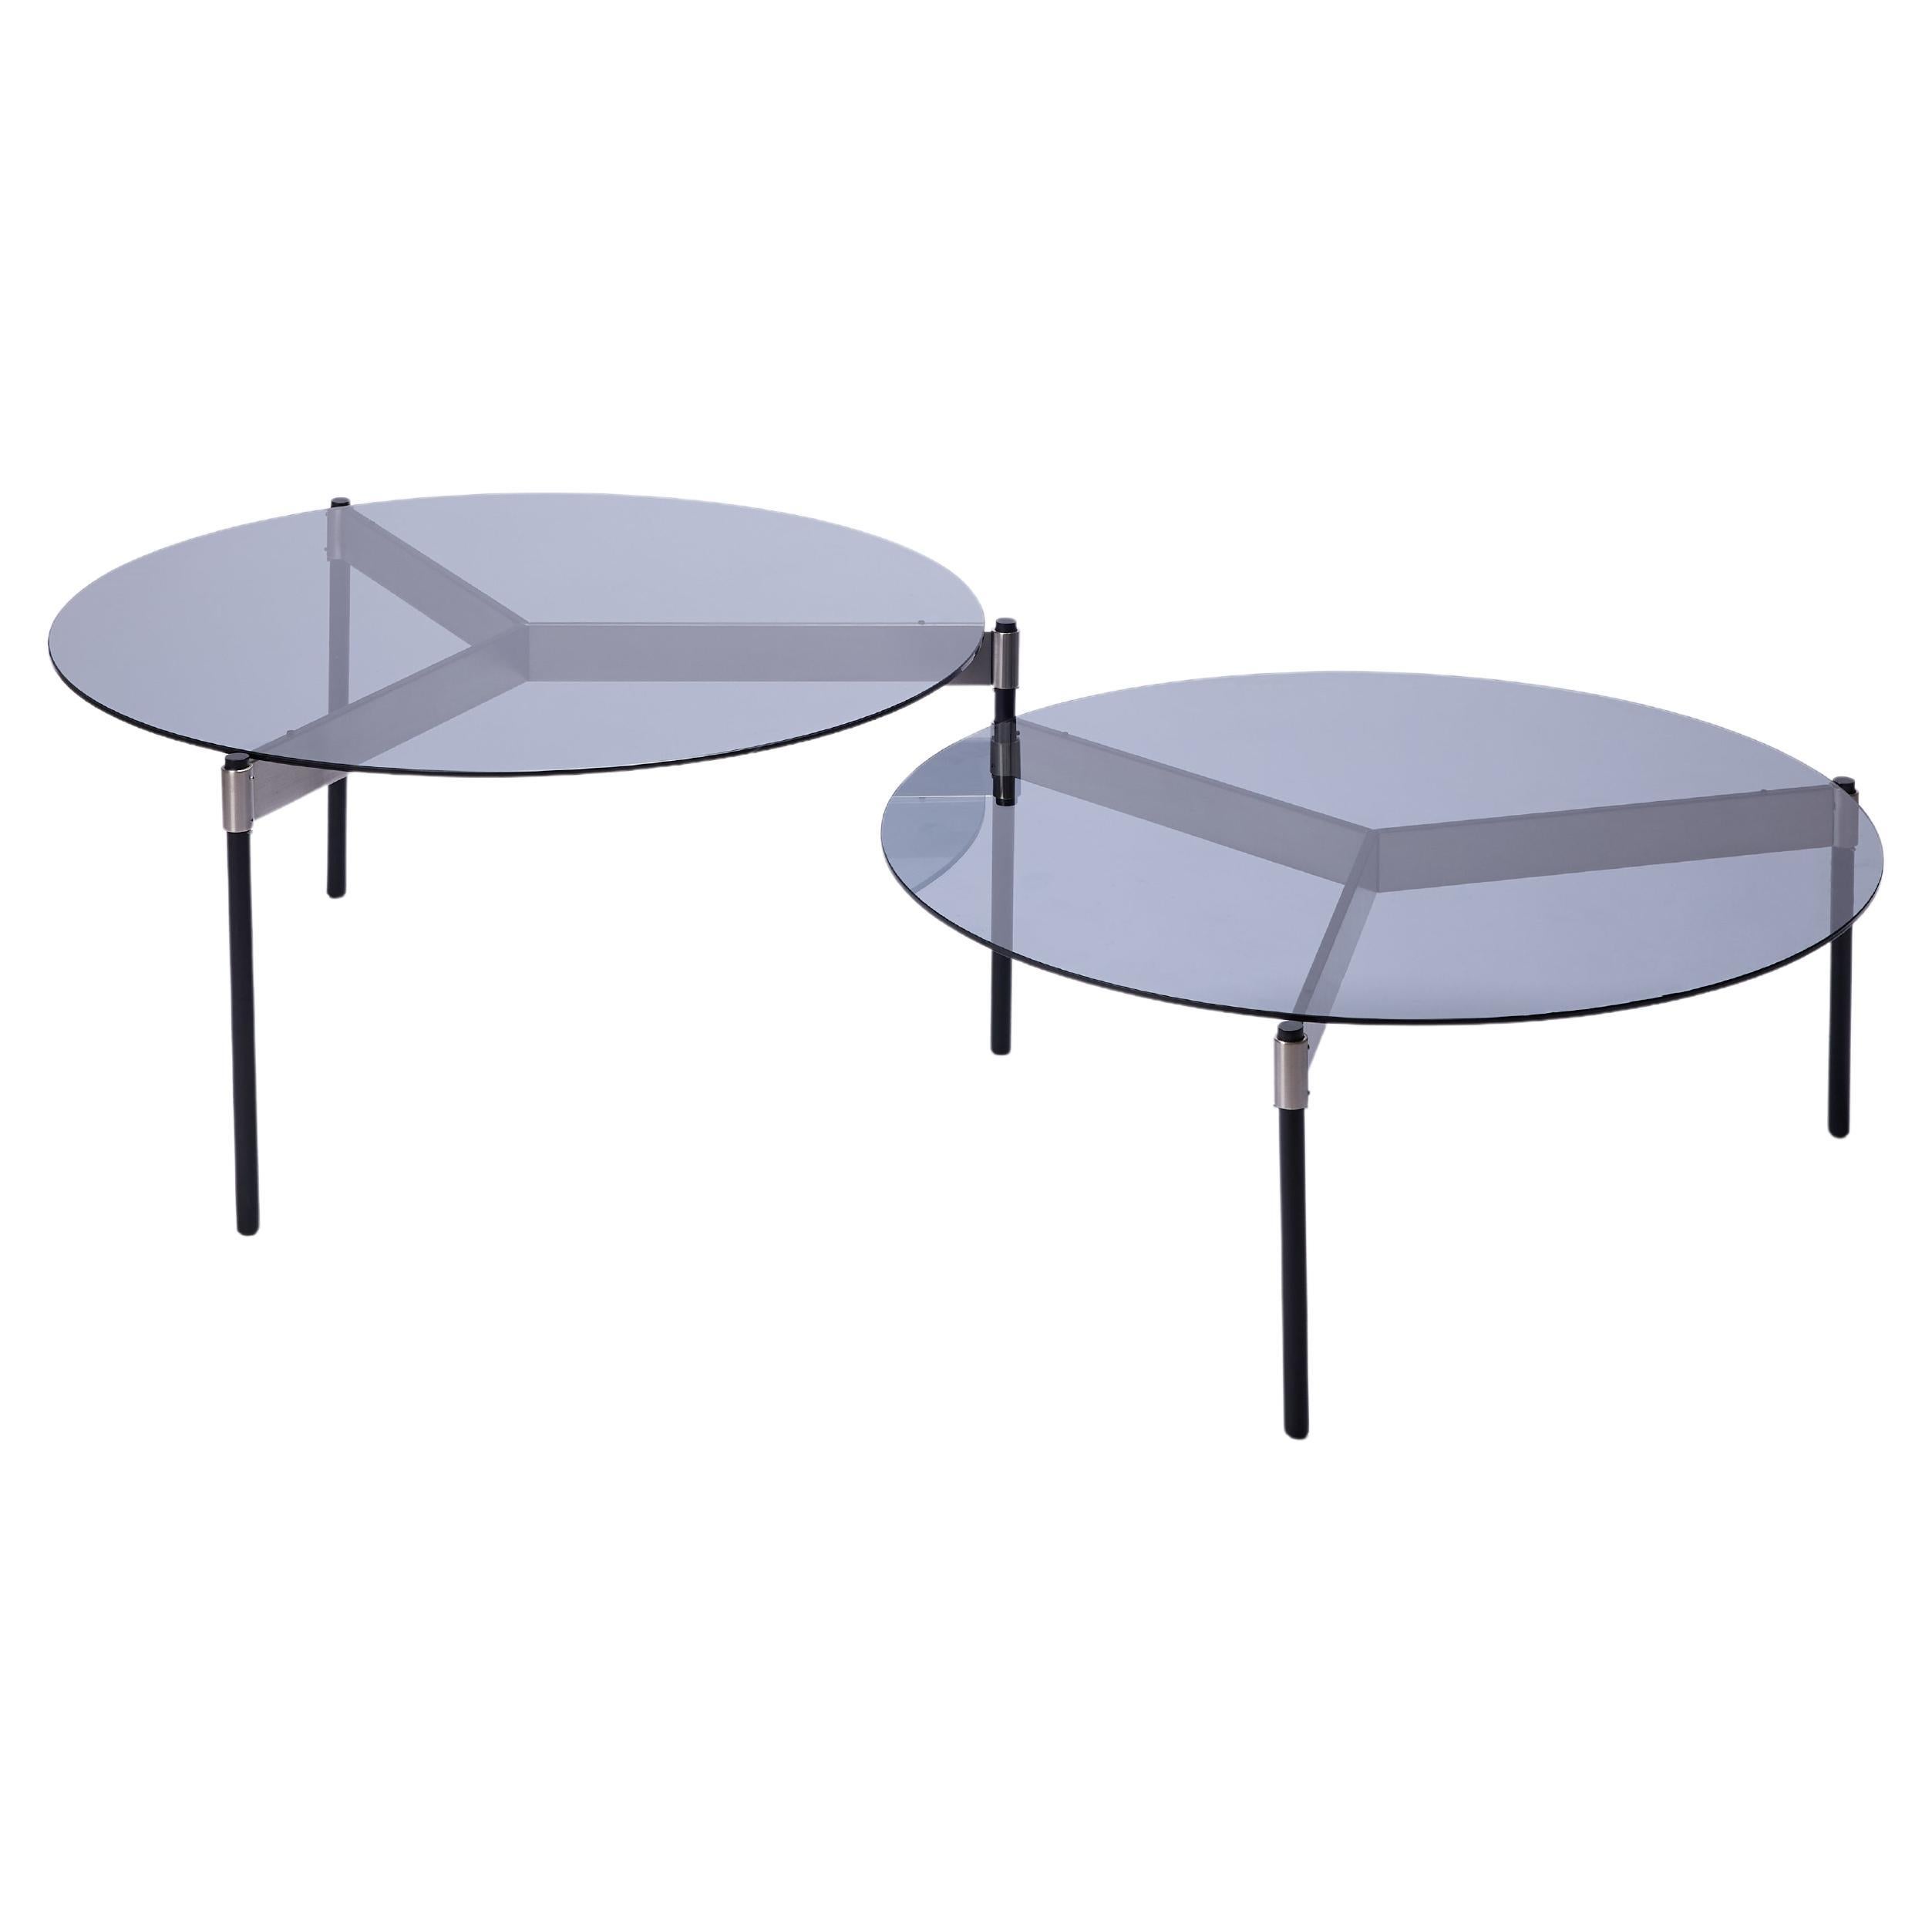 MOON Contemporary Round Coffee Table with Glass Tops and Steel Legs by Ries For Sale